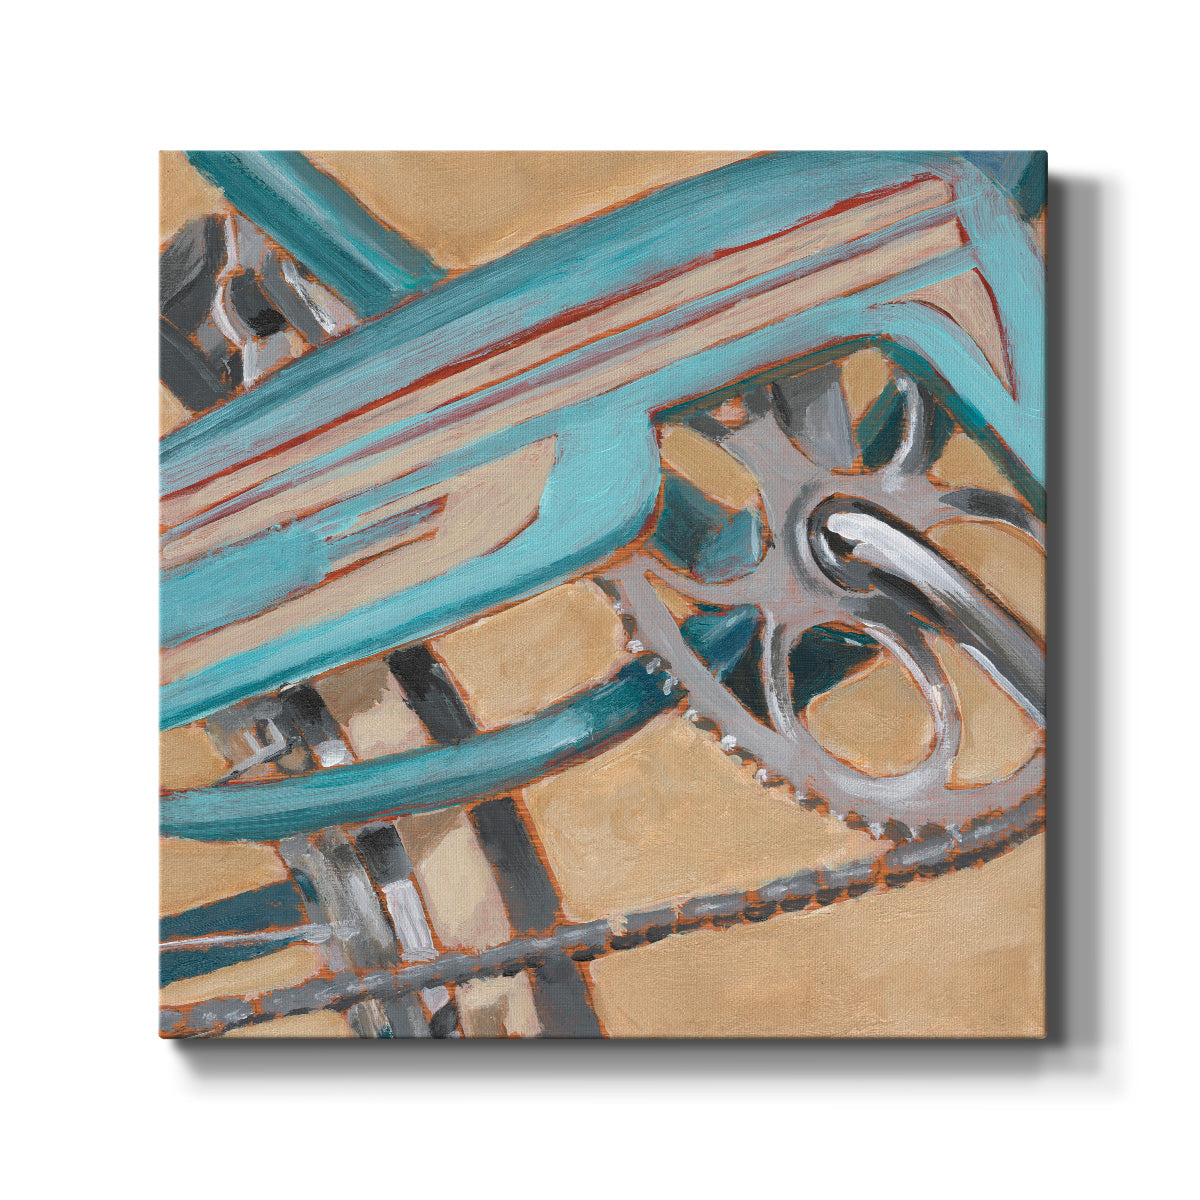 Retro Cycle III-Premium Gallery Wrapped Canvas - Ready to Hang